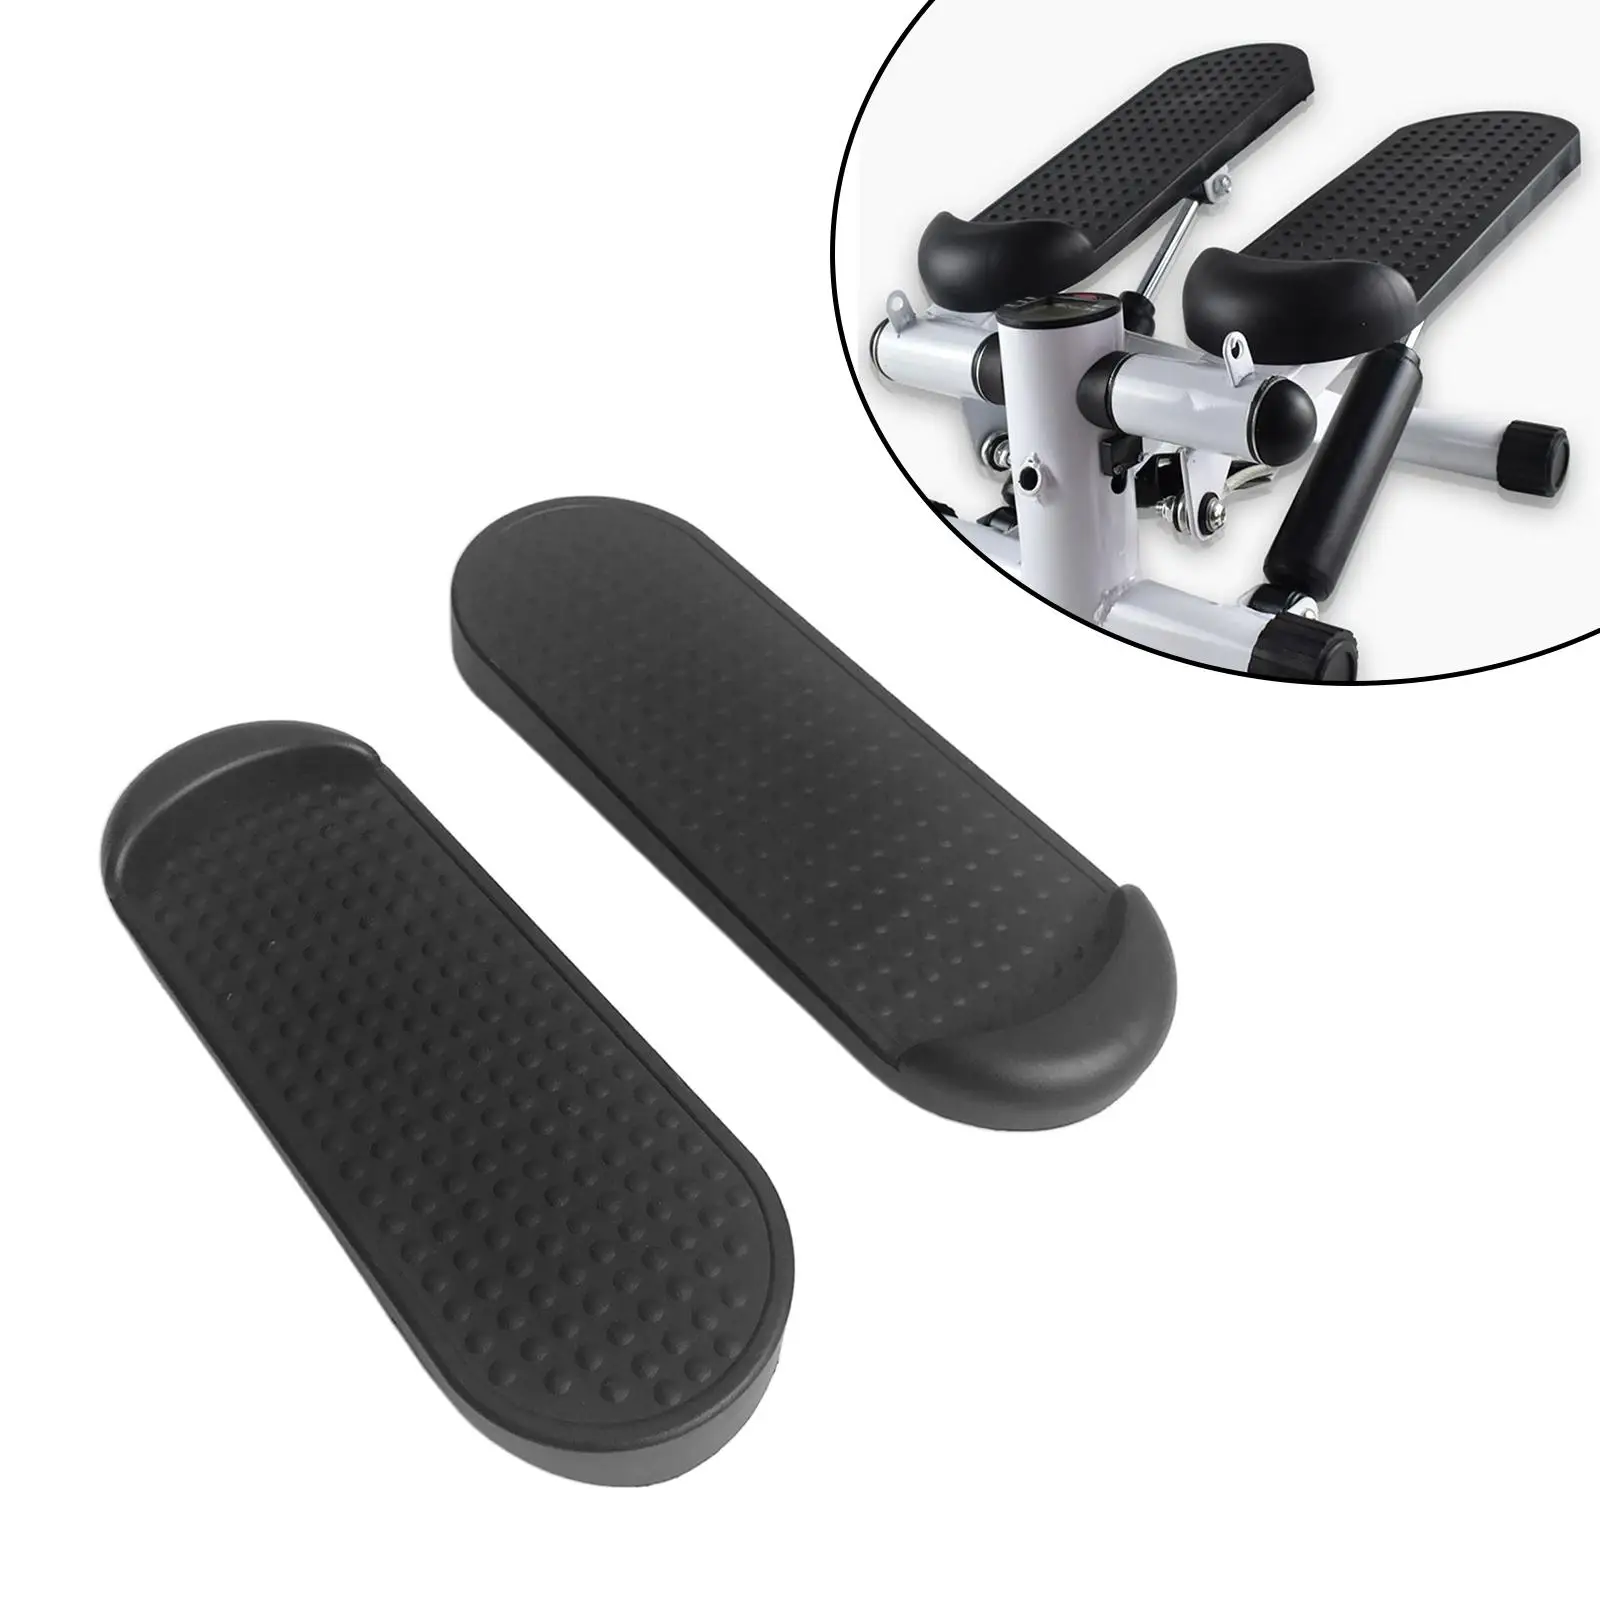 2Pcs Under Desk Elliptical Foot Pedals Leg Training Pedals Fitness Household Stair Stepper Pedal for Mini Stepper Office Home